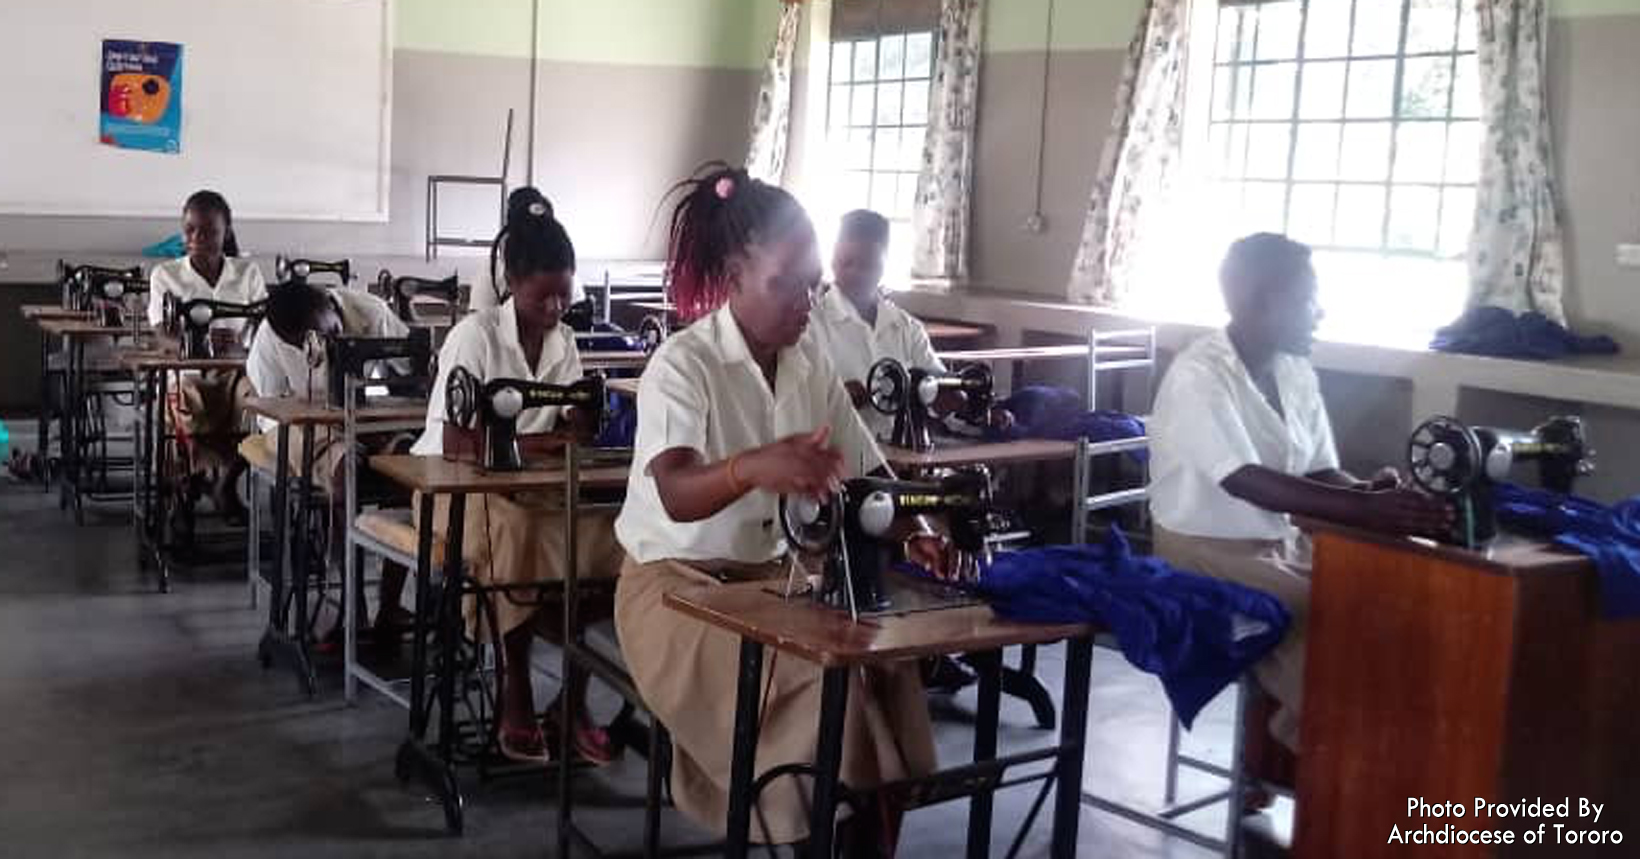 All the young girls are sitting down learning how to tailor. Tailoring is one of the skills the young girls are learning while they stay with the Vocational Training Institute.